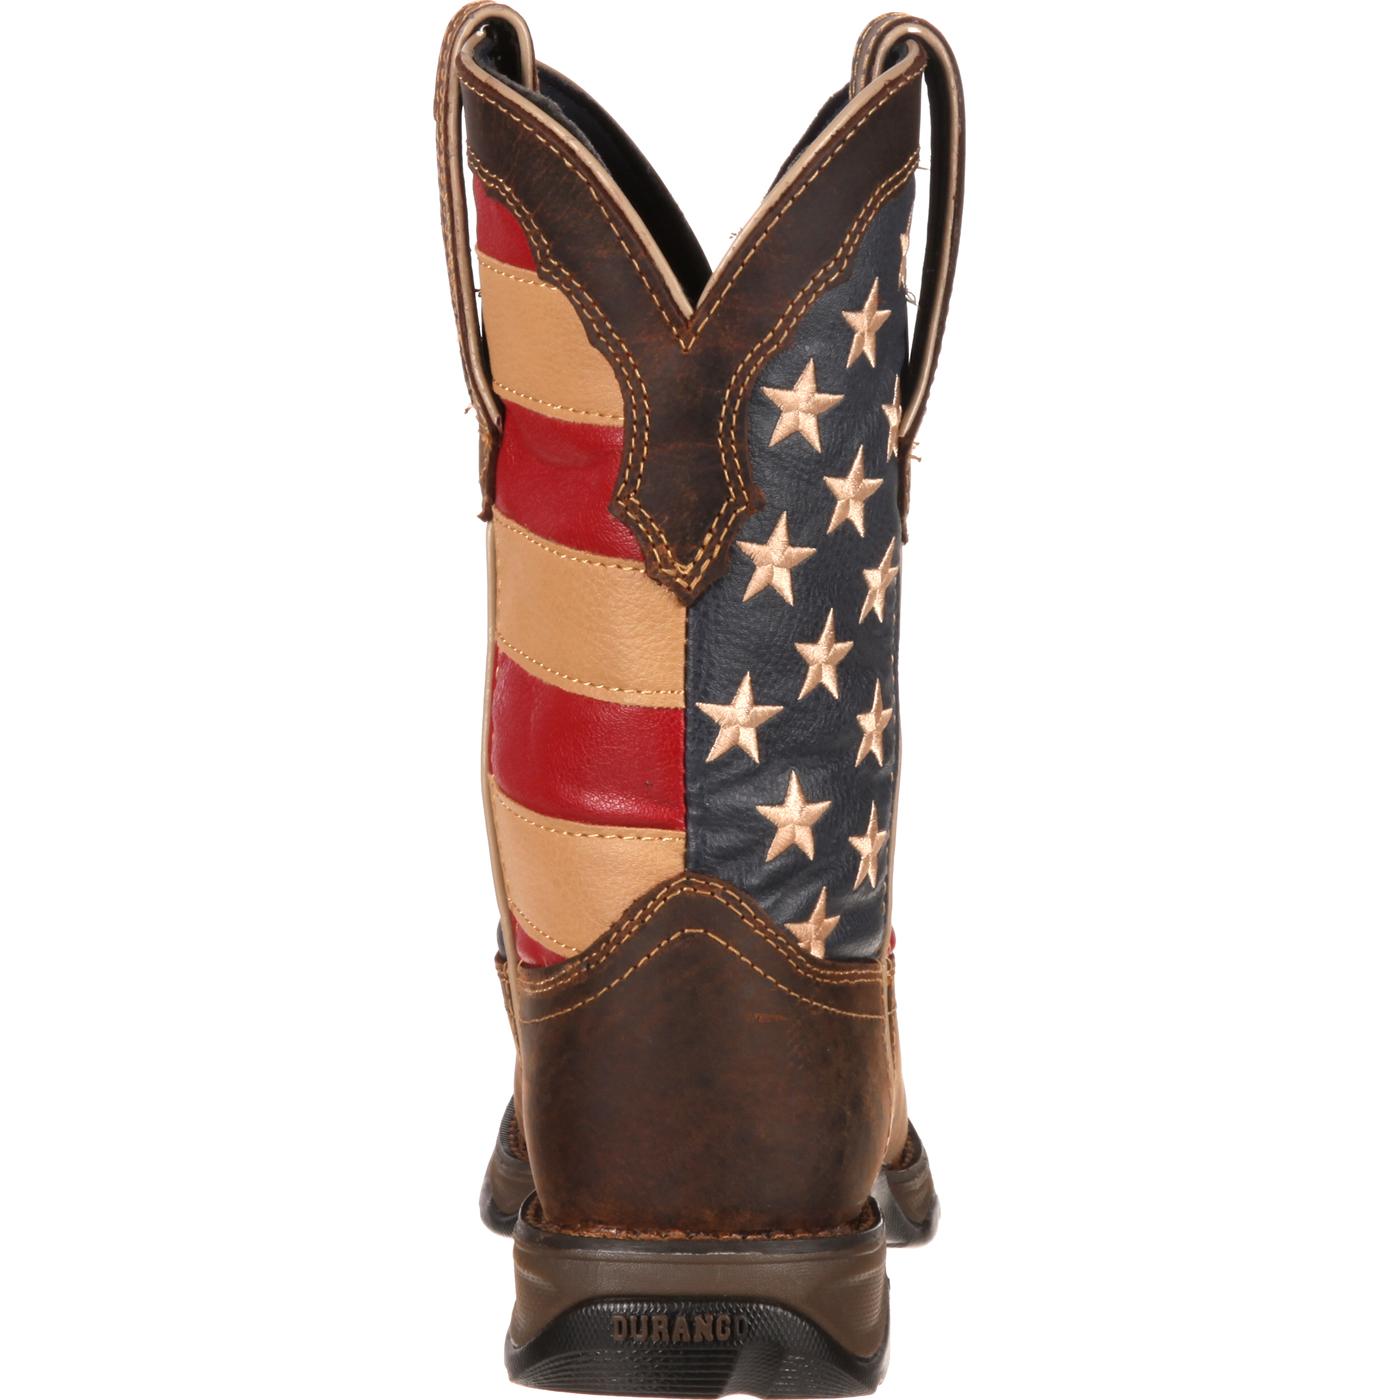 Lady Rebel by Durango® Patriotic Women's Pull-On Western Flag Boot Size 11(M) - image 4 of 7